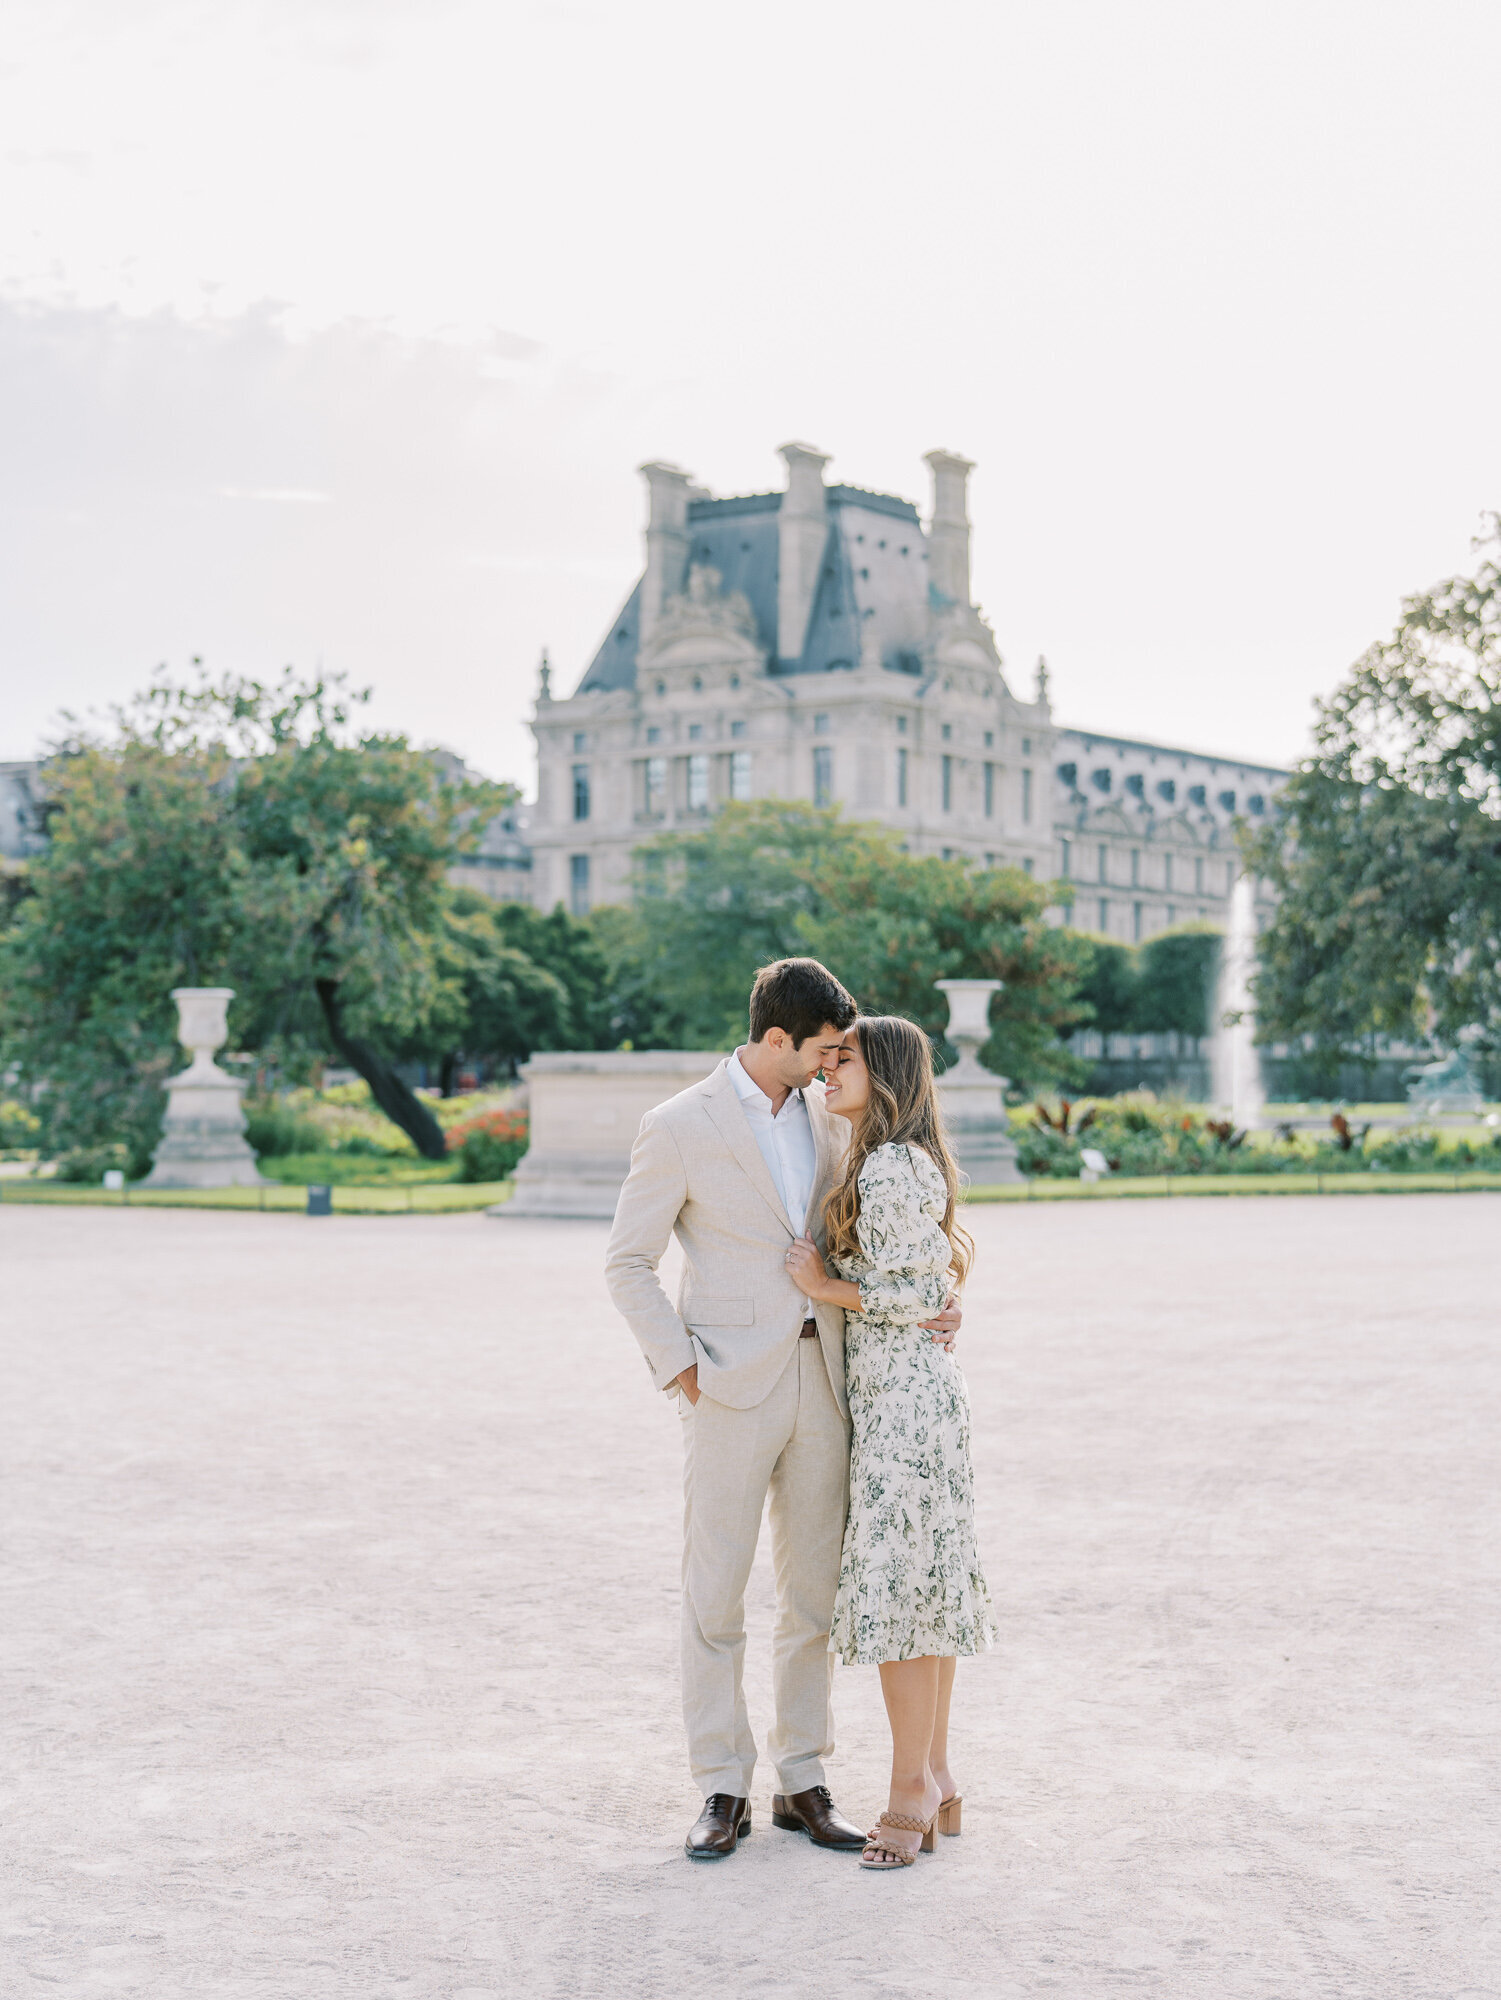 Christine & Kyle Paris Photosession by Tatyana Chaiko photographer in France-134